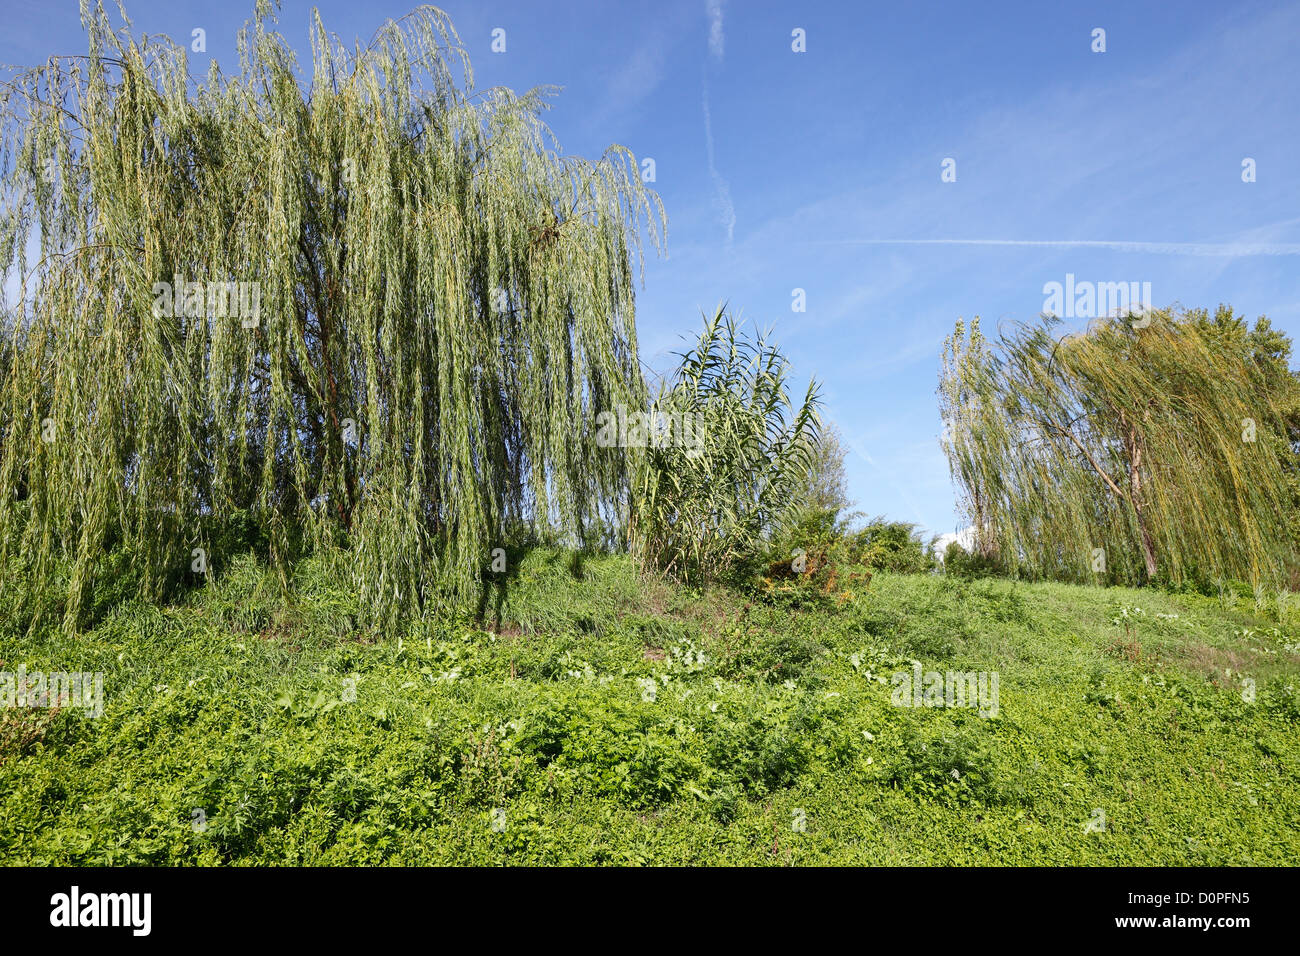 The season of weeping willows Stock Photo